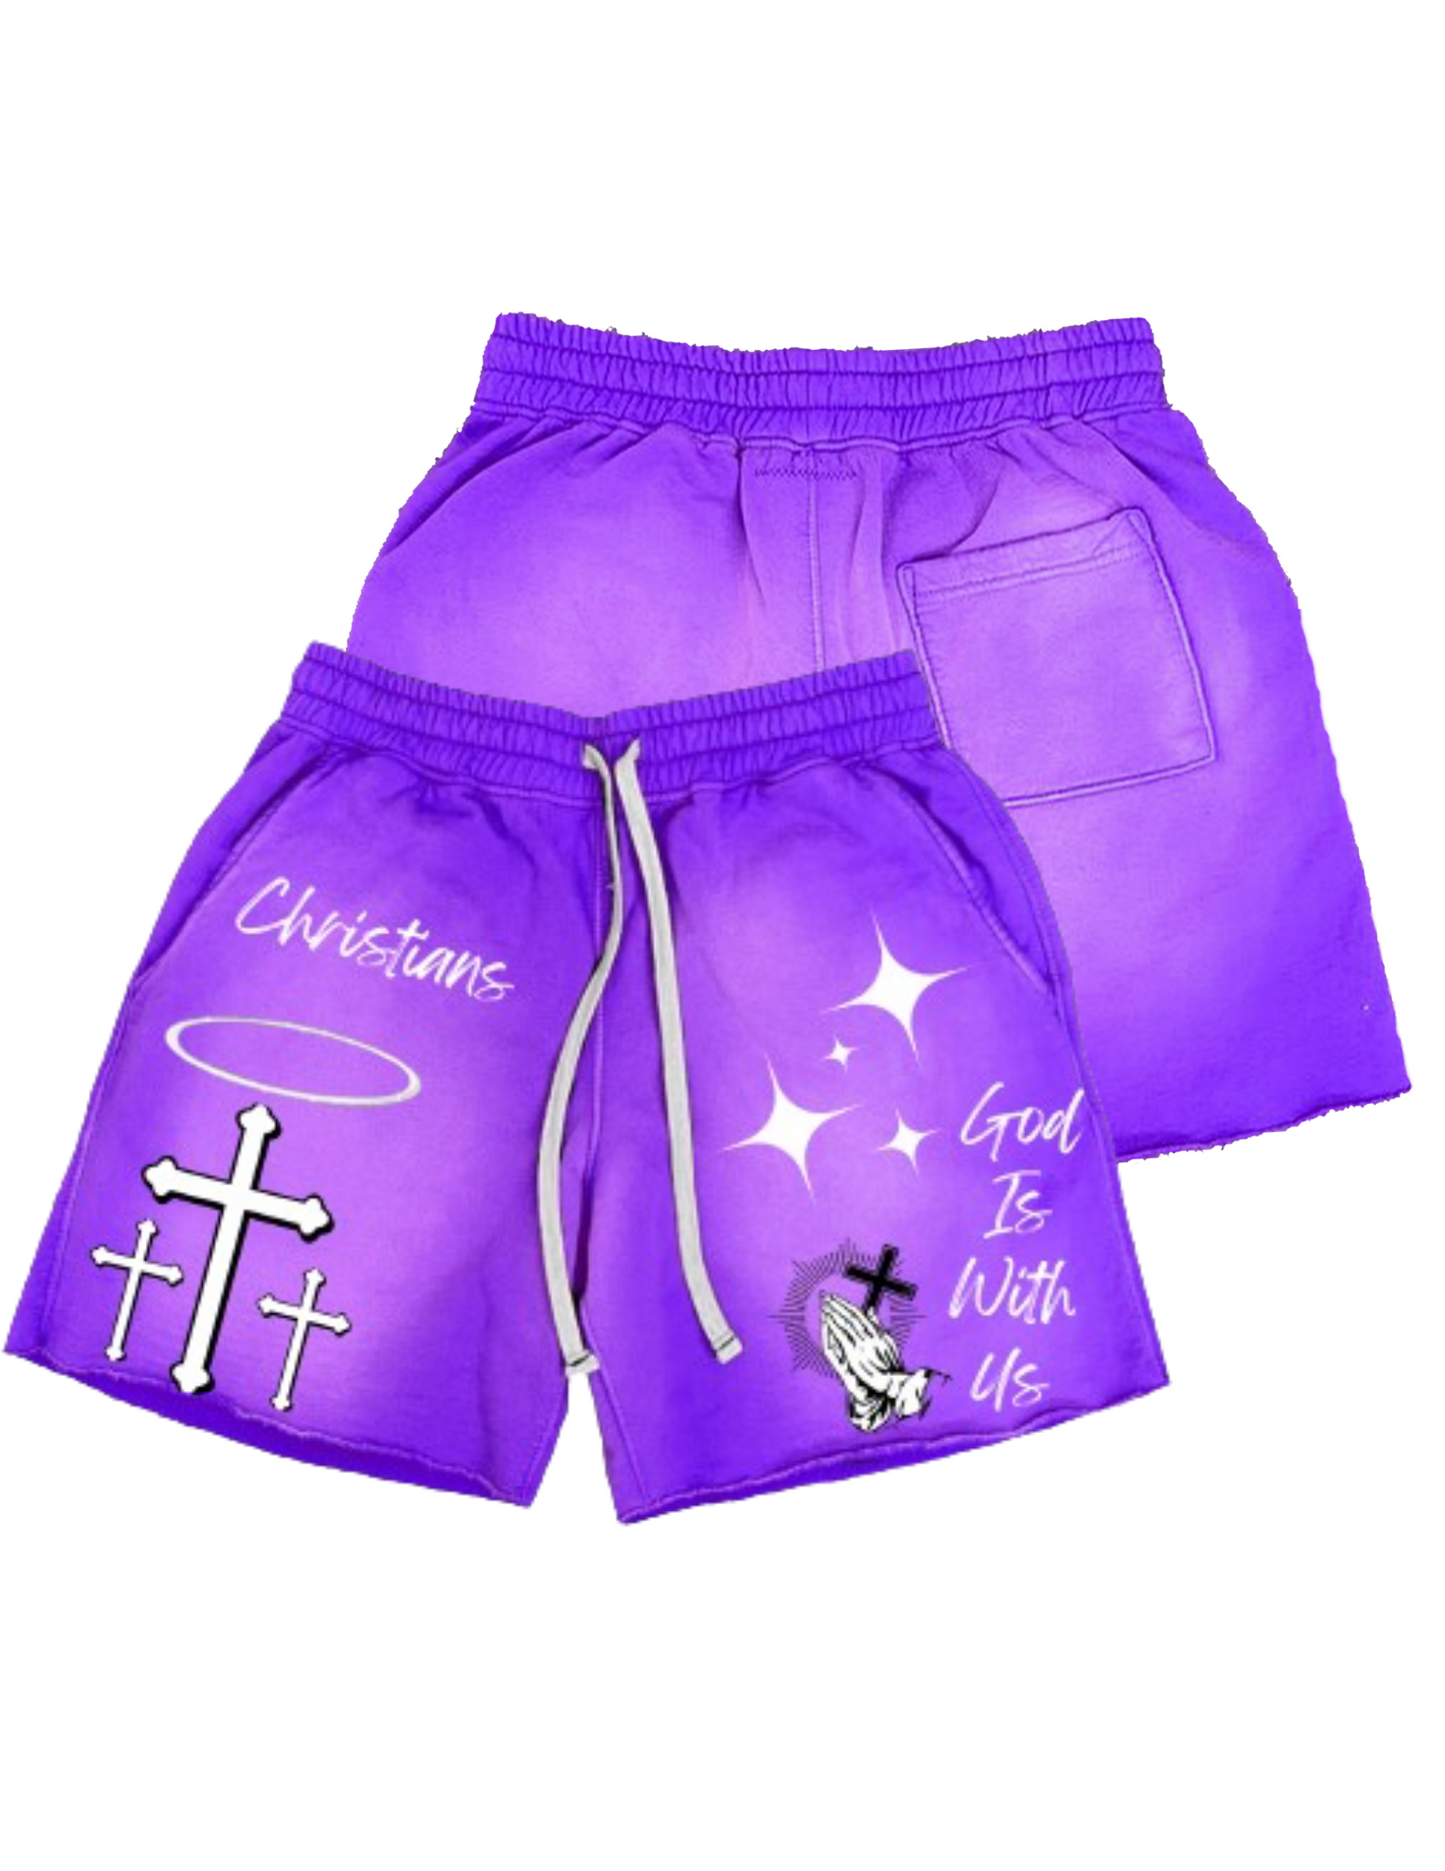 "God Is With Us" SHORTS (Purple)